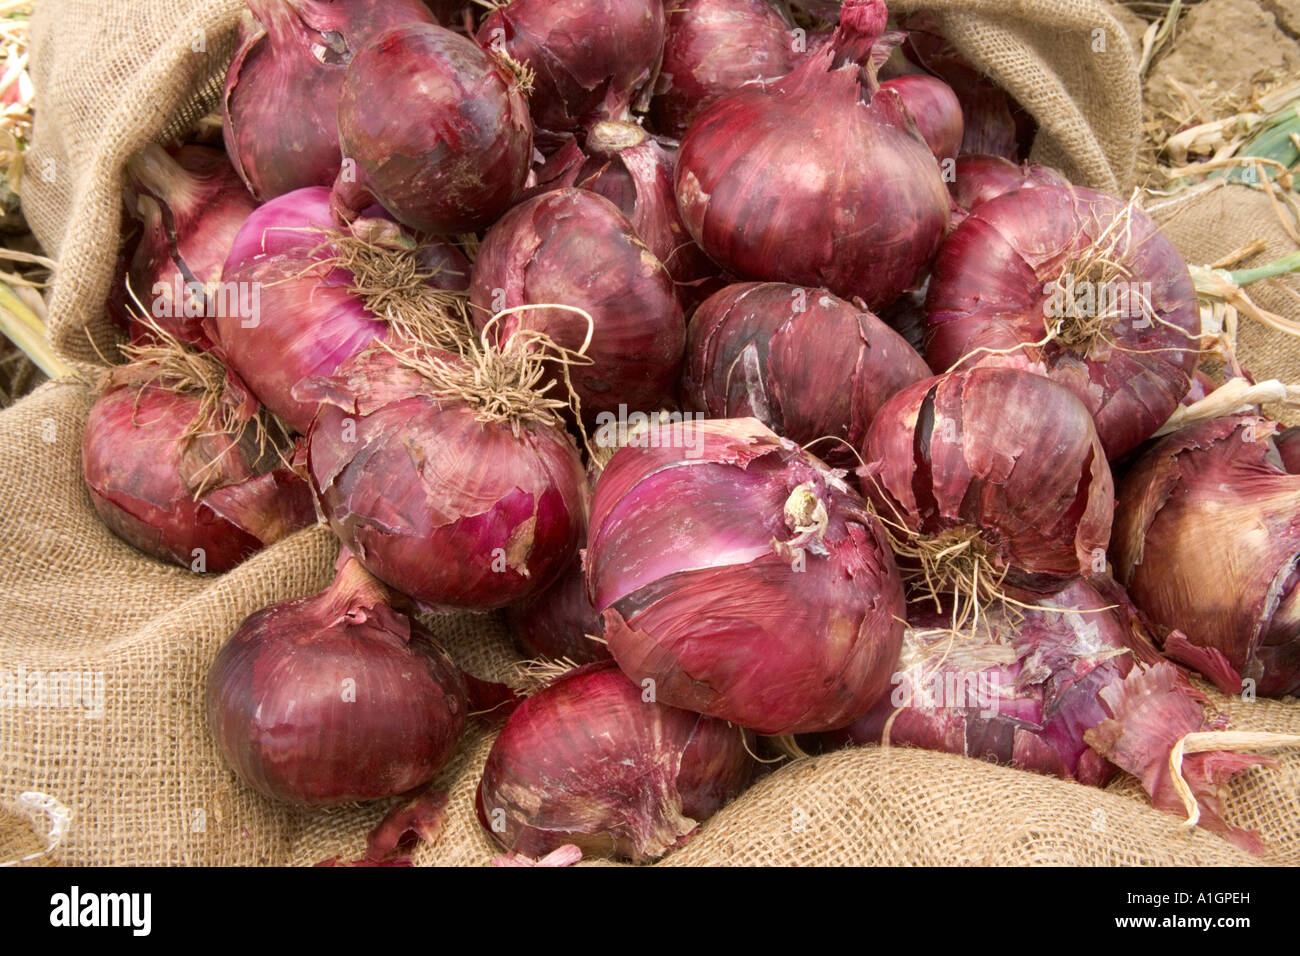 Harvested Red Onions piled drying in burlap sack, California Stock Photo